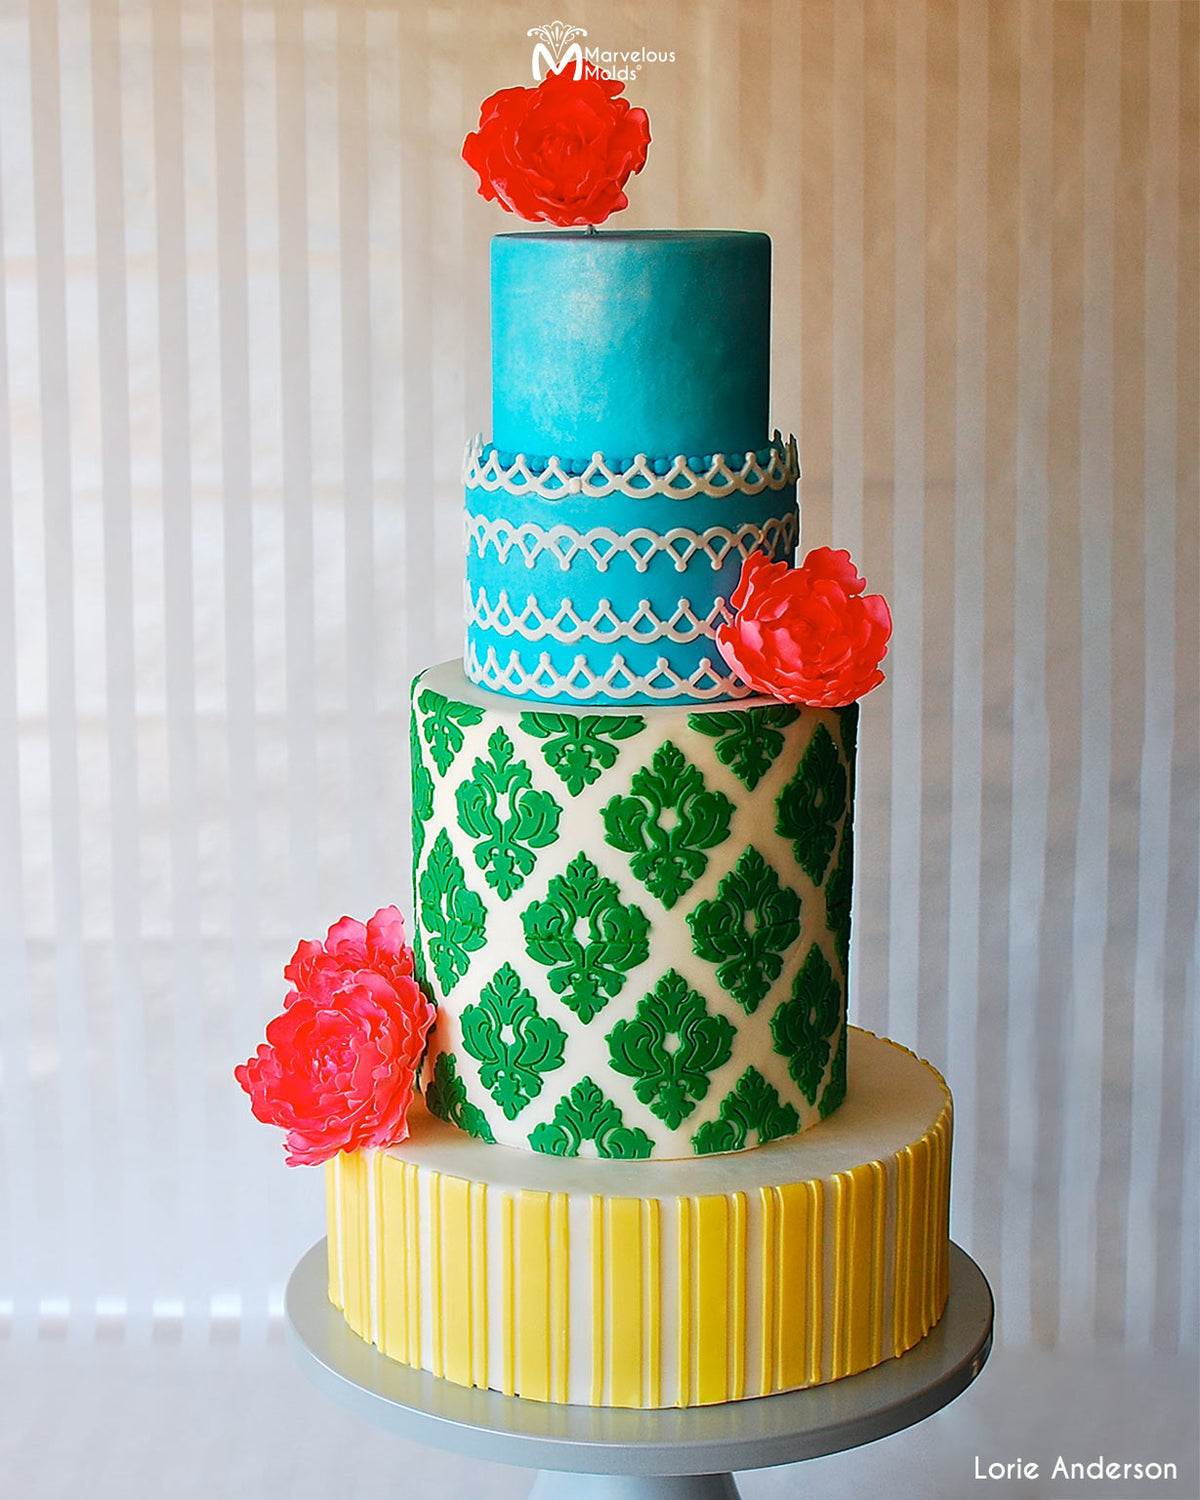 Colorful Cake Decorated Using the Marvelous Molds Regalia Silicone Onlay Cake Stencil Mold